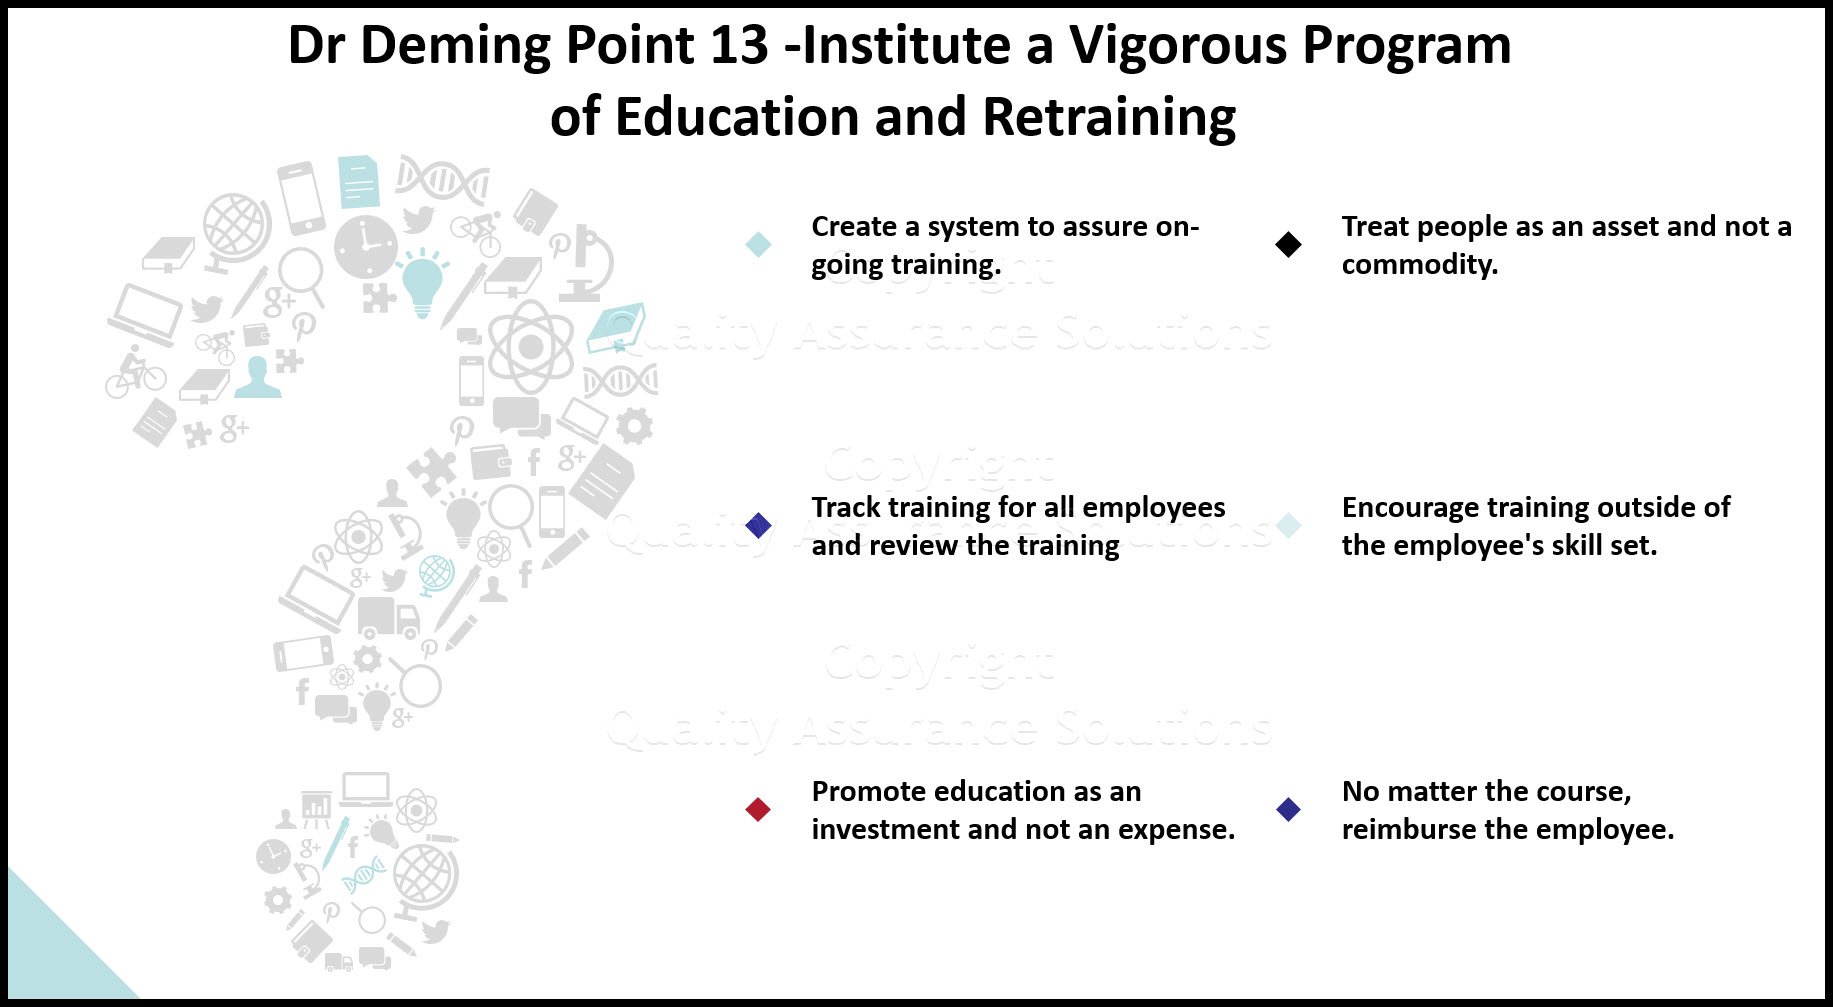 Learn Dr Deming Point 13 of Dr Deming 14 points, Institute a Vigorous Program of Education and Retraining.